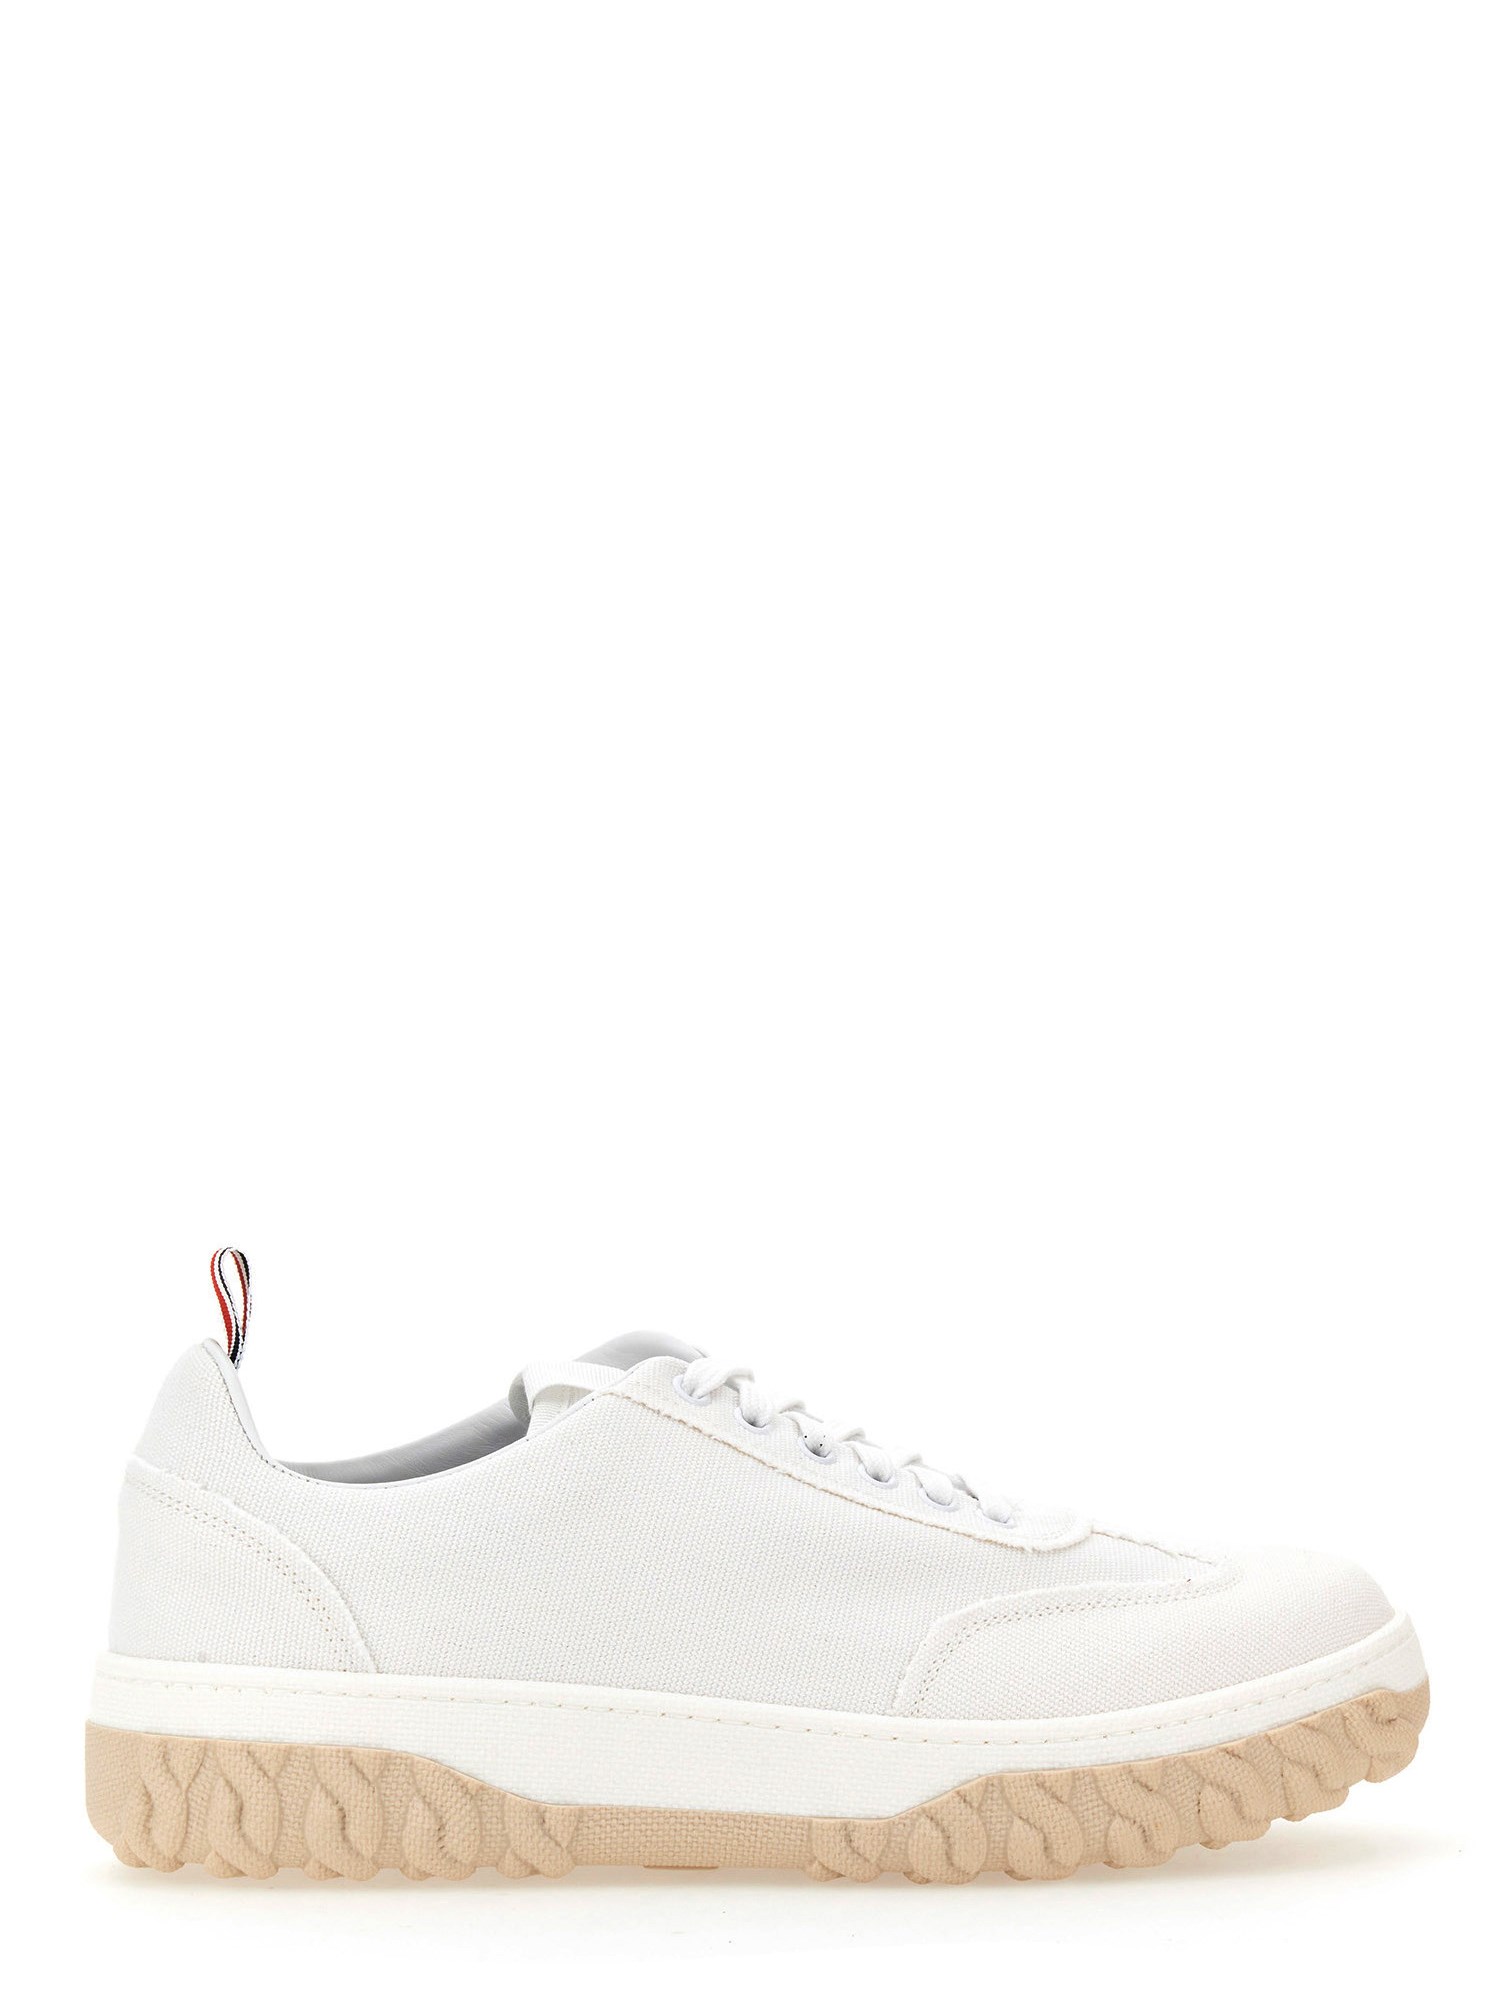 thom browne cotton canvas sneaker